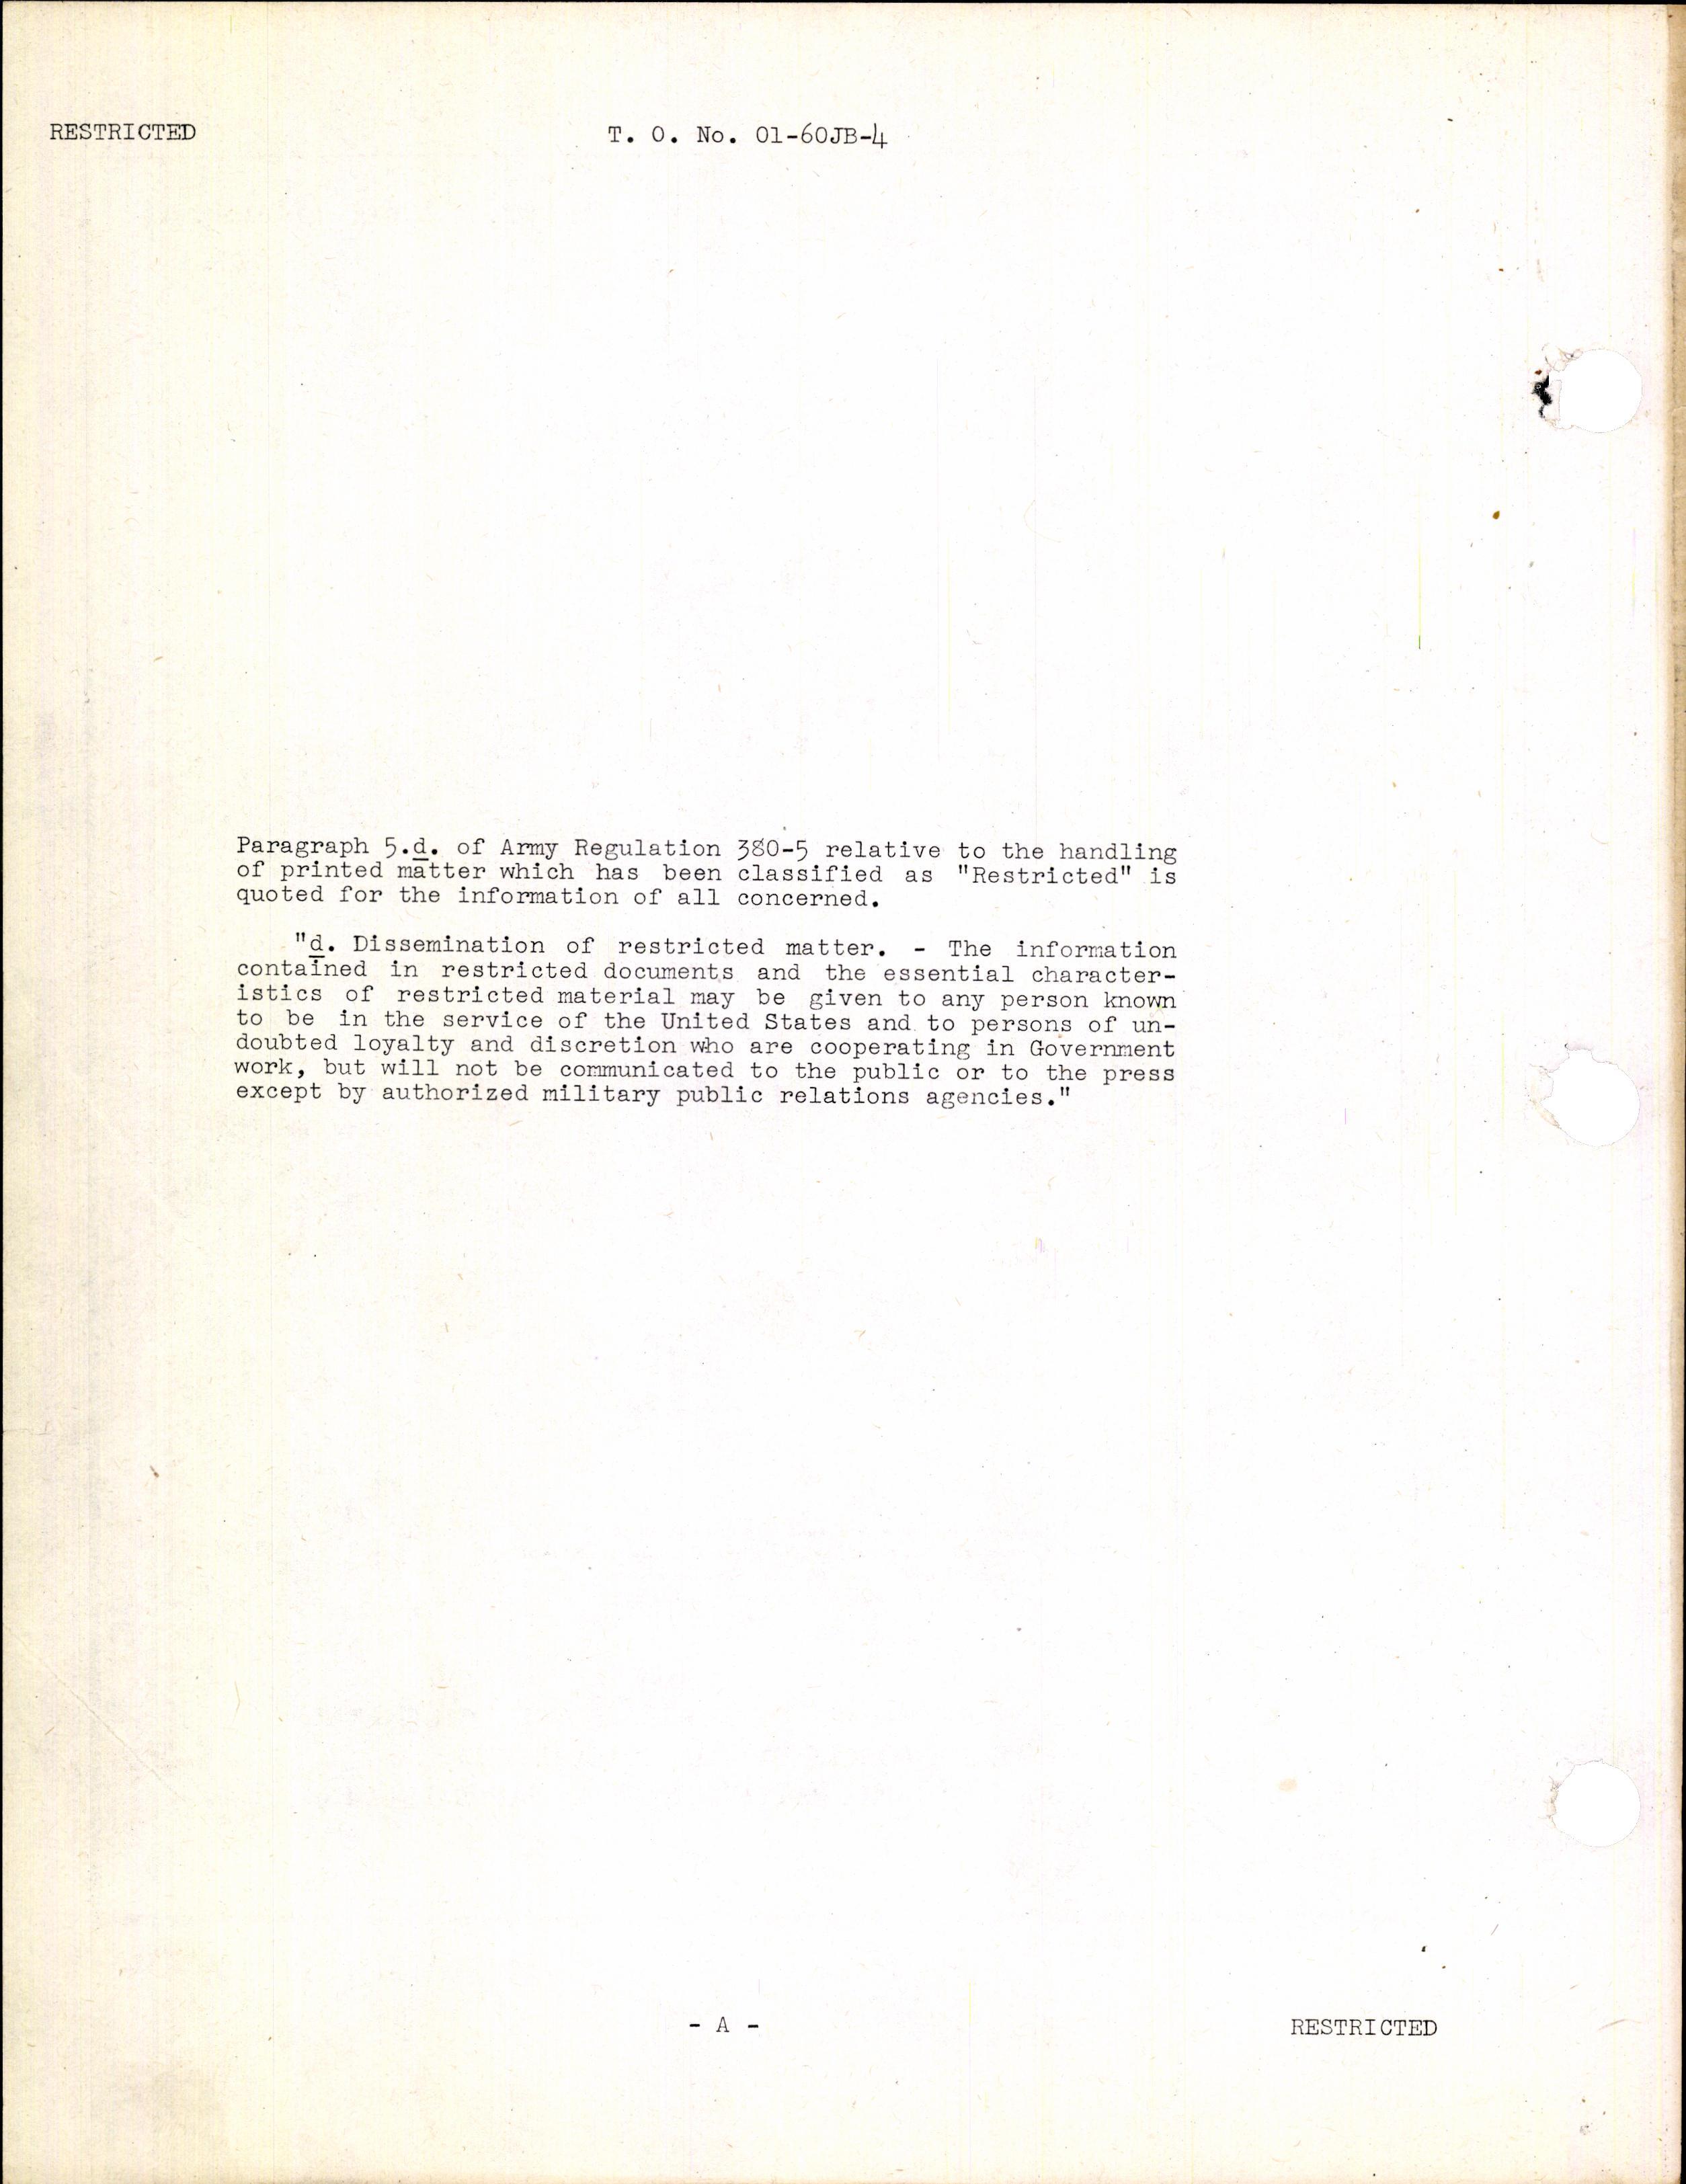 Sample page 2 from AirCorps Library document: Parts Catalog for P-51 Airplane